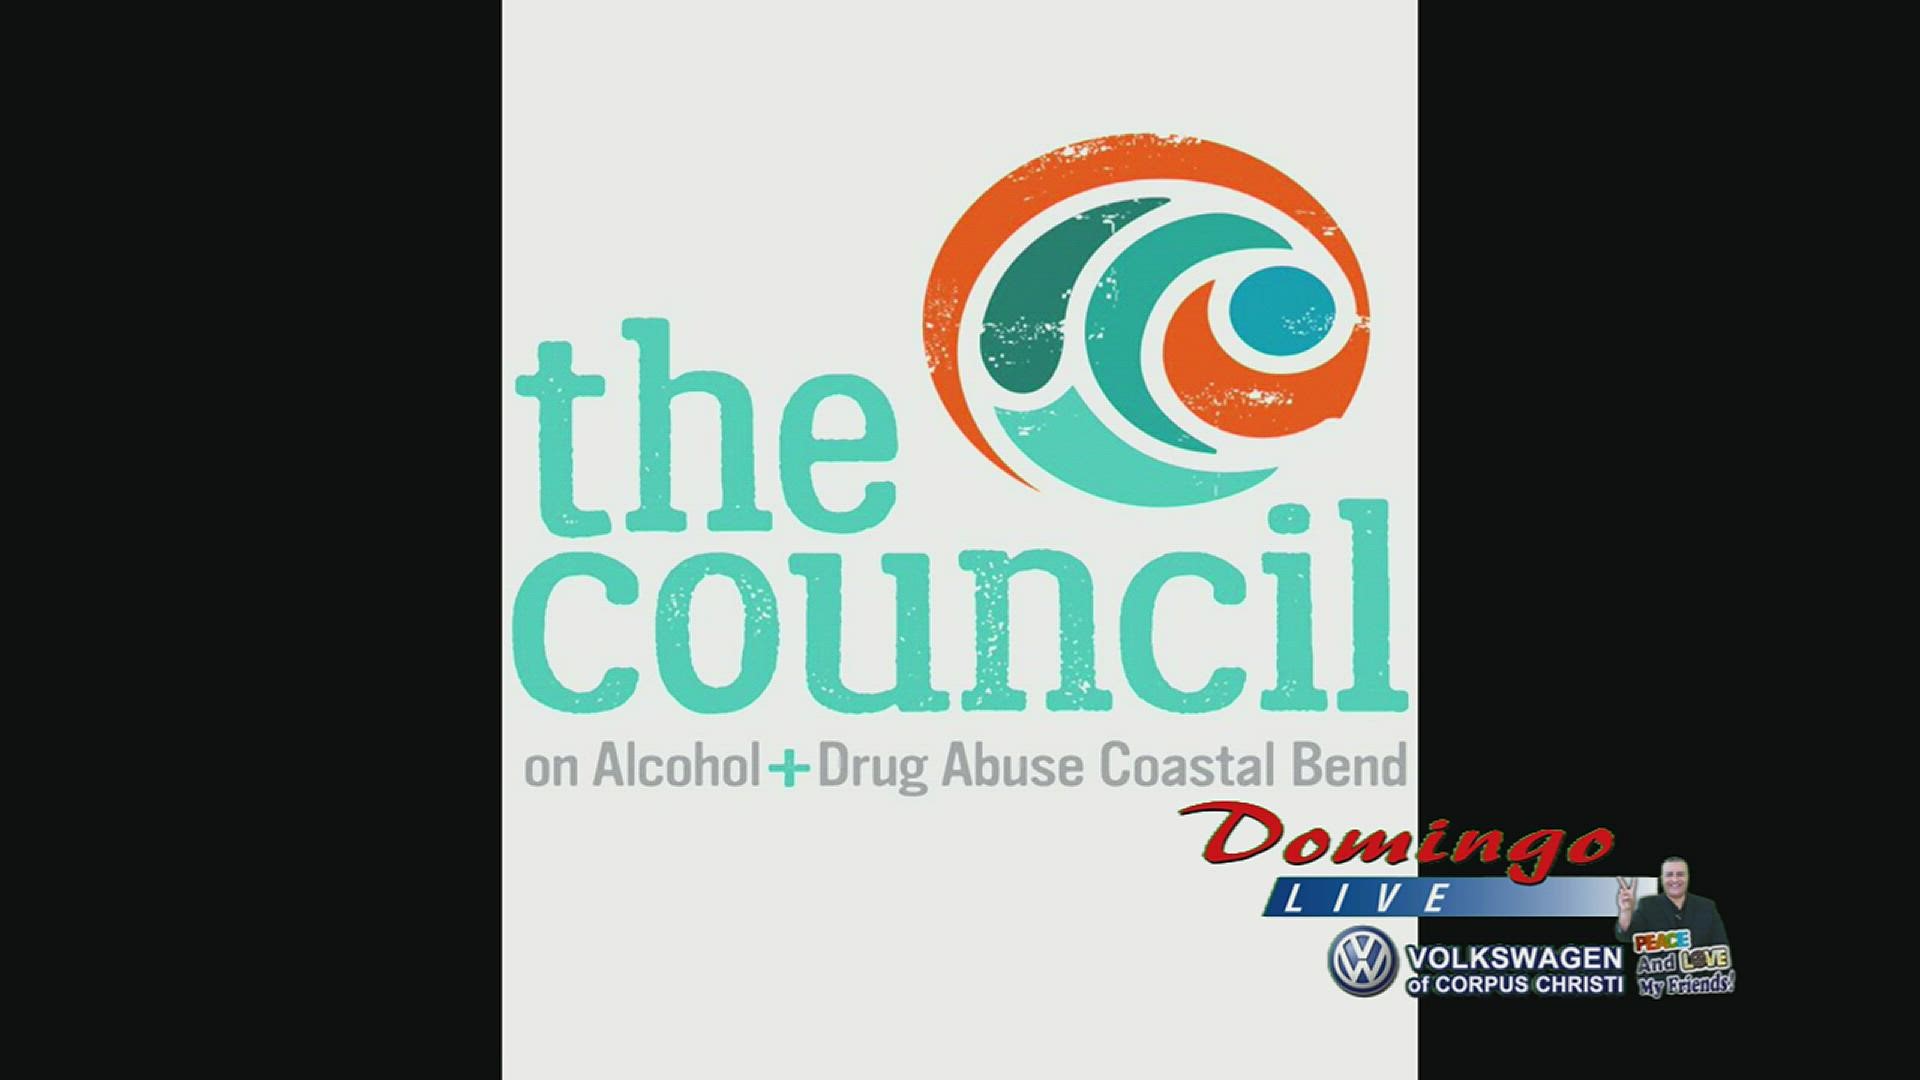 Kalynn Thompson with the Council on Alcohol & Drug Abuse tells us what to expect at the very first "Stars and Strikes Bowling Tournament" on Nov. 13.